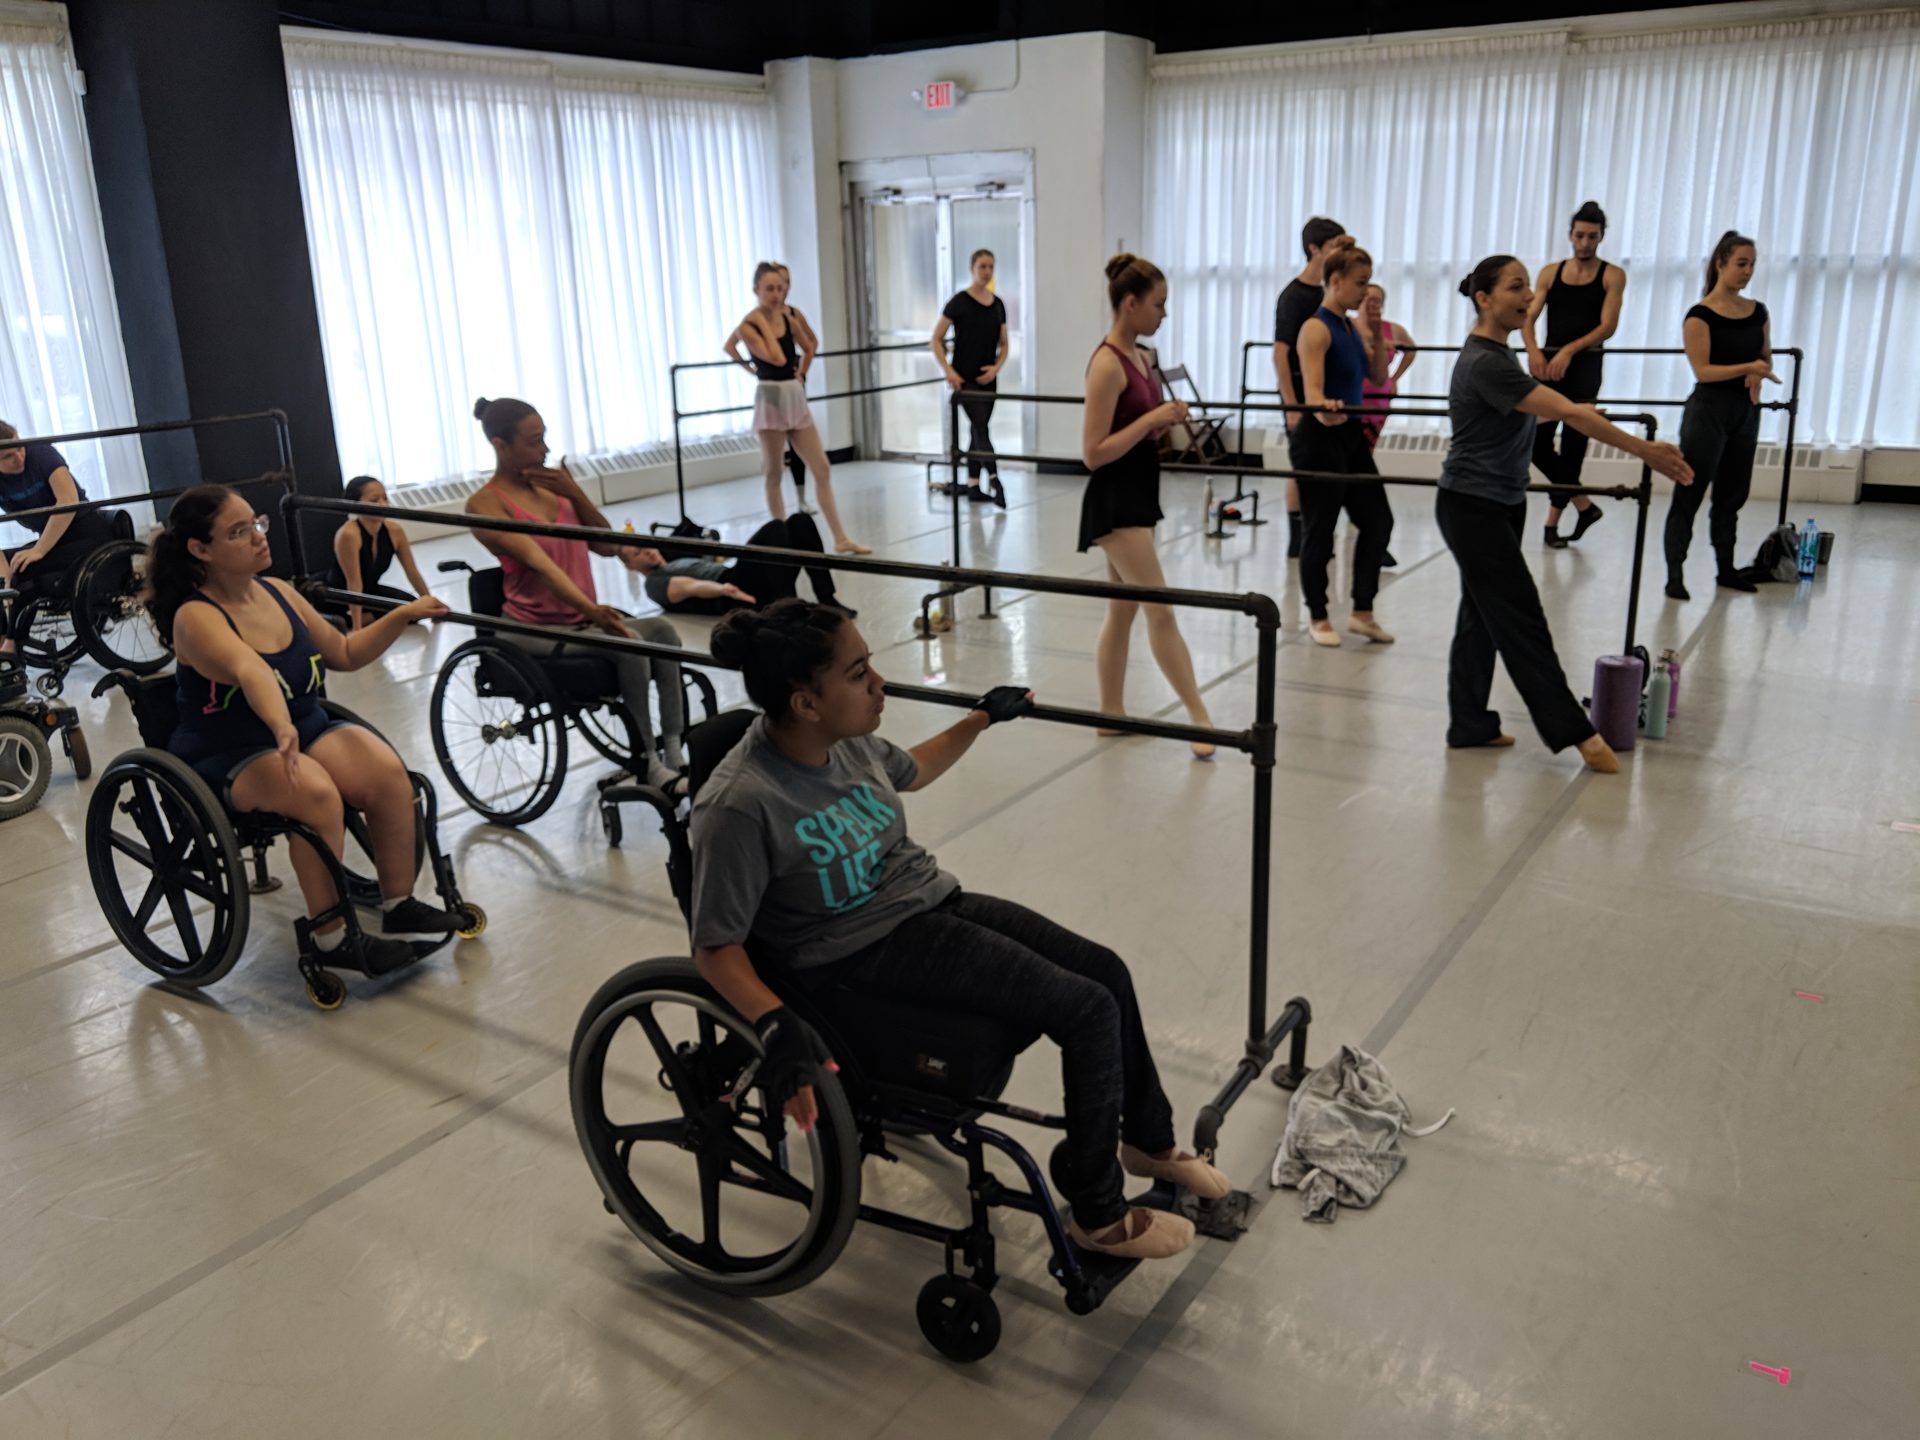 Dancers with and without disabilities in a ballet class.